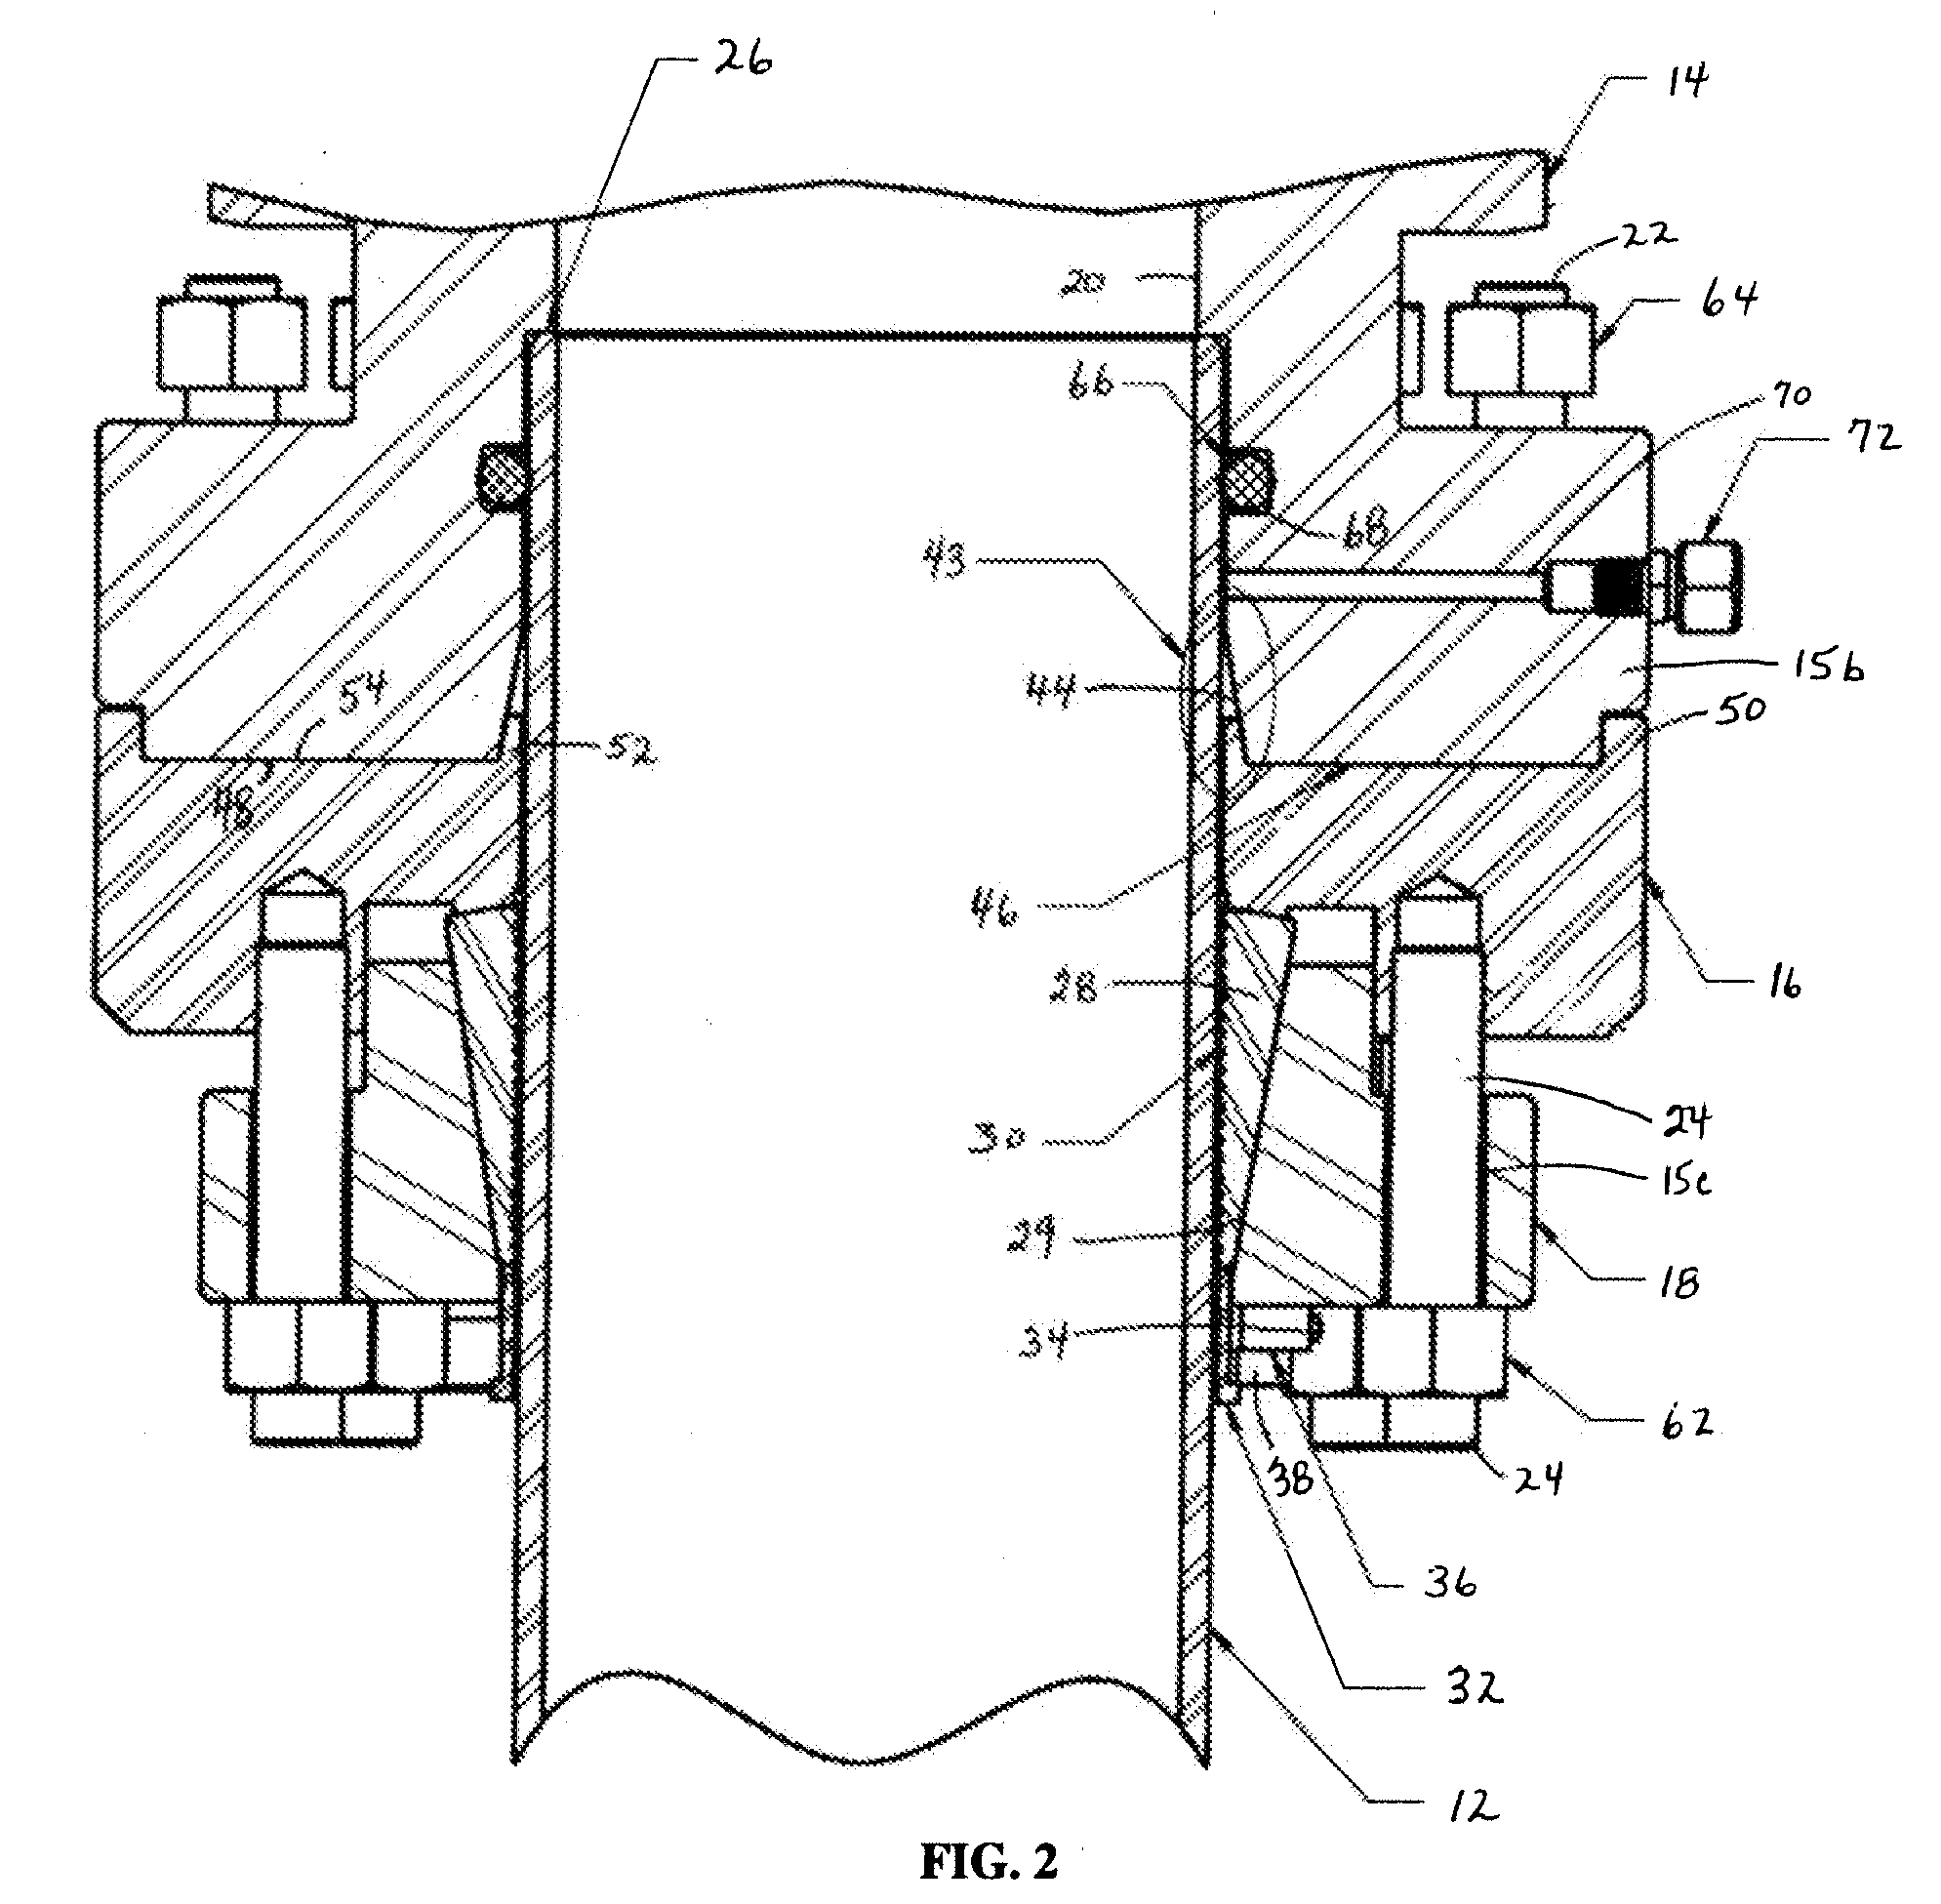 Casing head slip lock connection for high temperature service